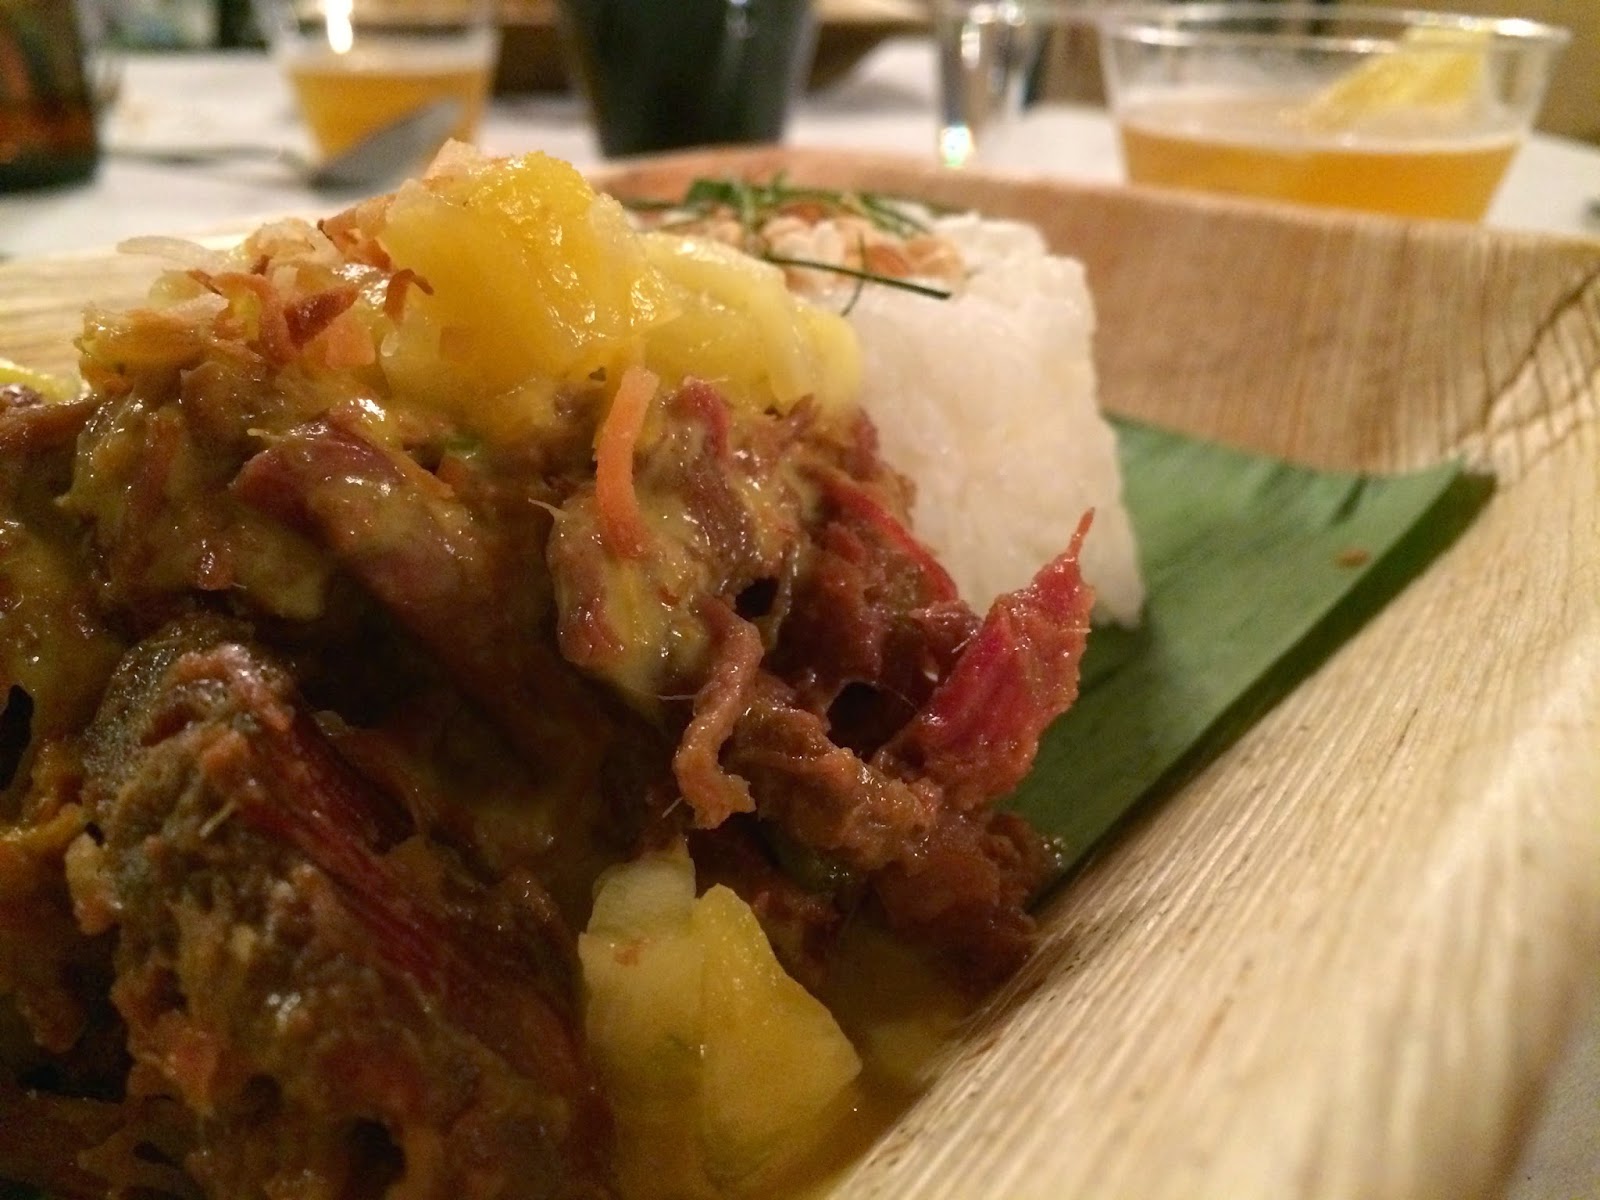 Fourth Course: Goat Rendang with Coconut Rice, Pickled Pineapple, and Kaffir Lime